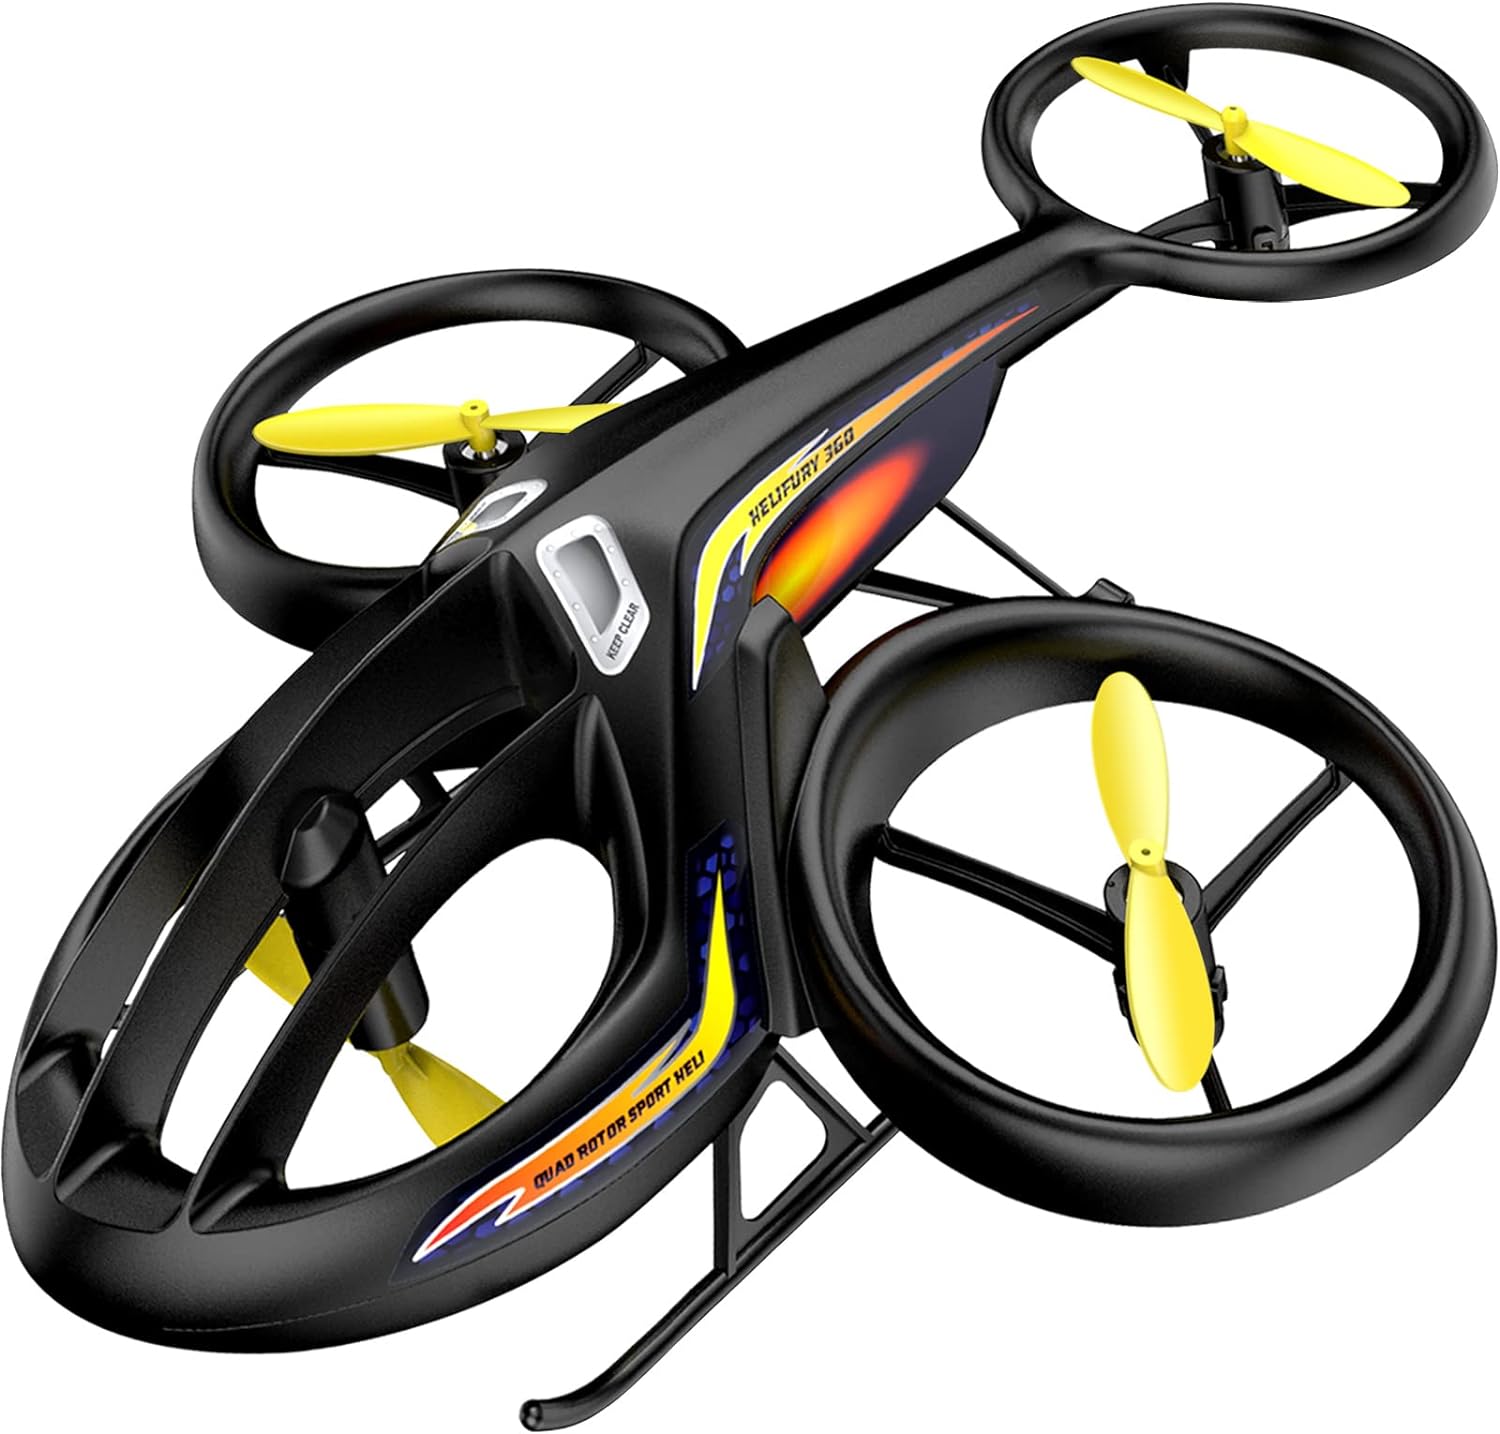 SYMA RC Helicopter: The Latest Remote Control Drone Toy that’s Taking the World by Storm!